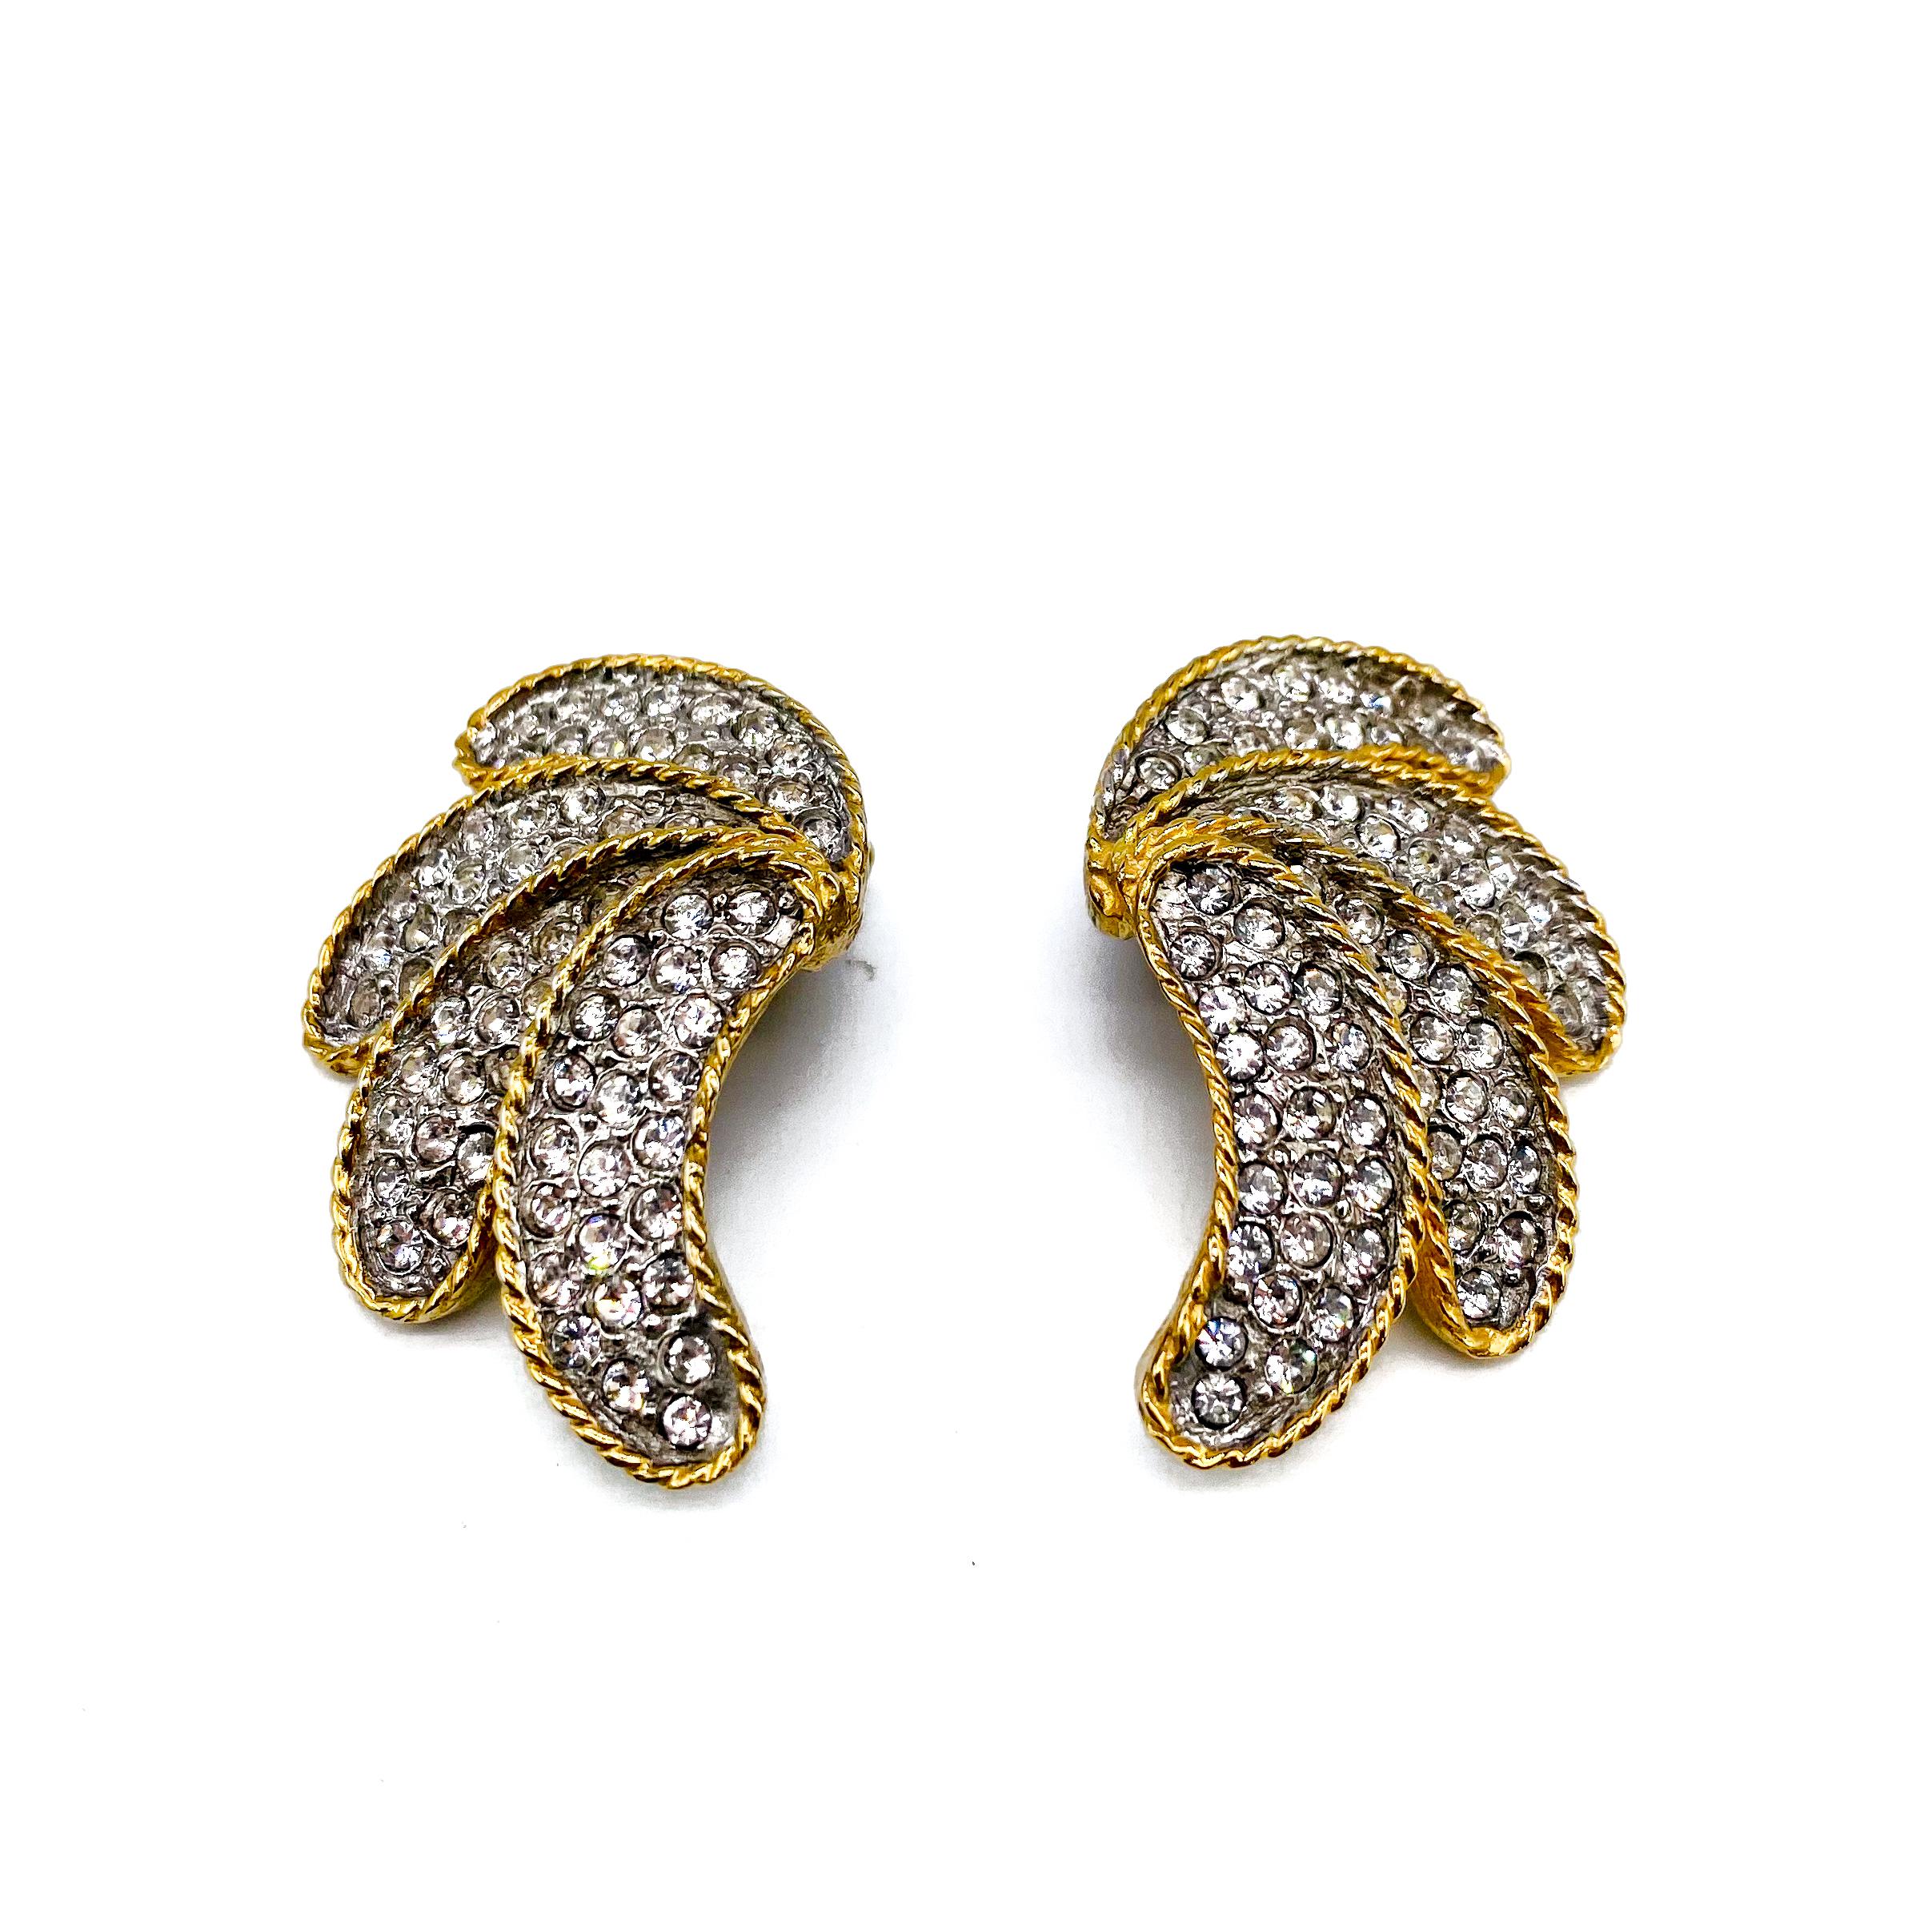 Les Bernard 1980s Vintage Clip on Earrings

Fantastic show-stopping 1980s earrings from Les Bernard, the famous American designer of costume jewellery for Alexis Carrington herself. 

Les Bernard was a pioneer in the field of premium costume